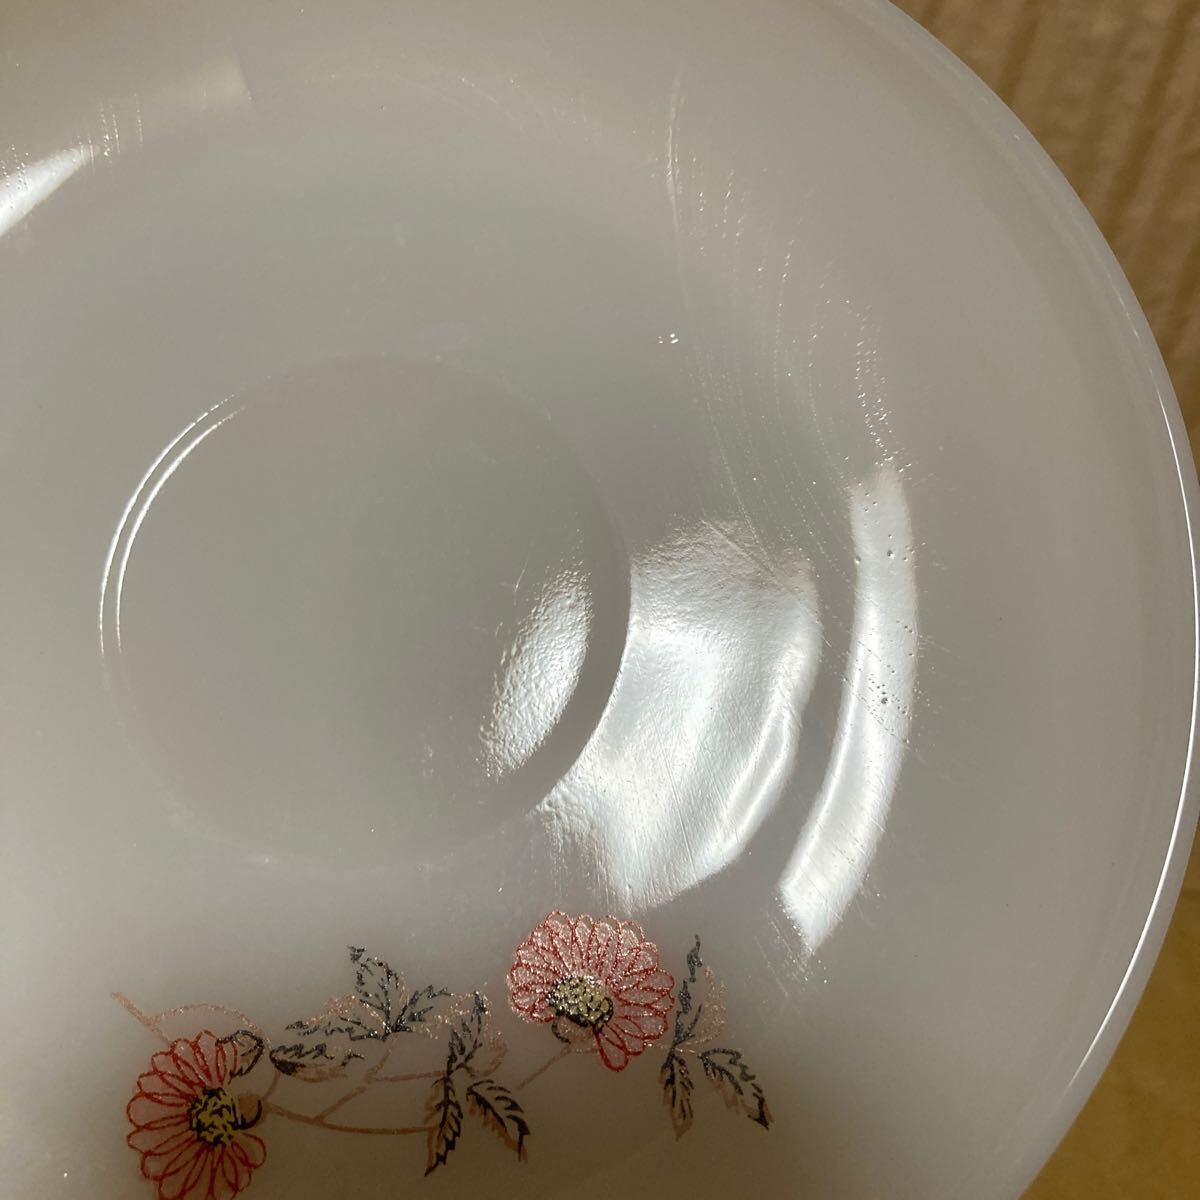  Fire King full - let cup & saucer pink floral print premium series ①